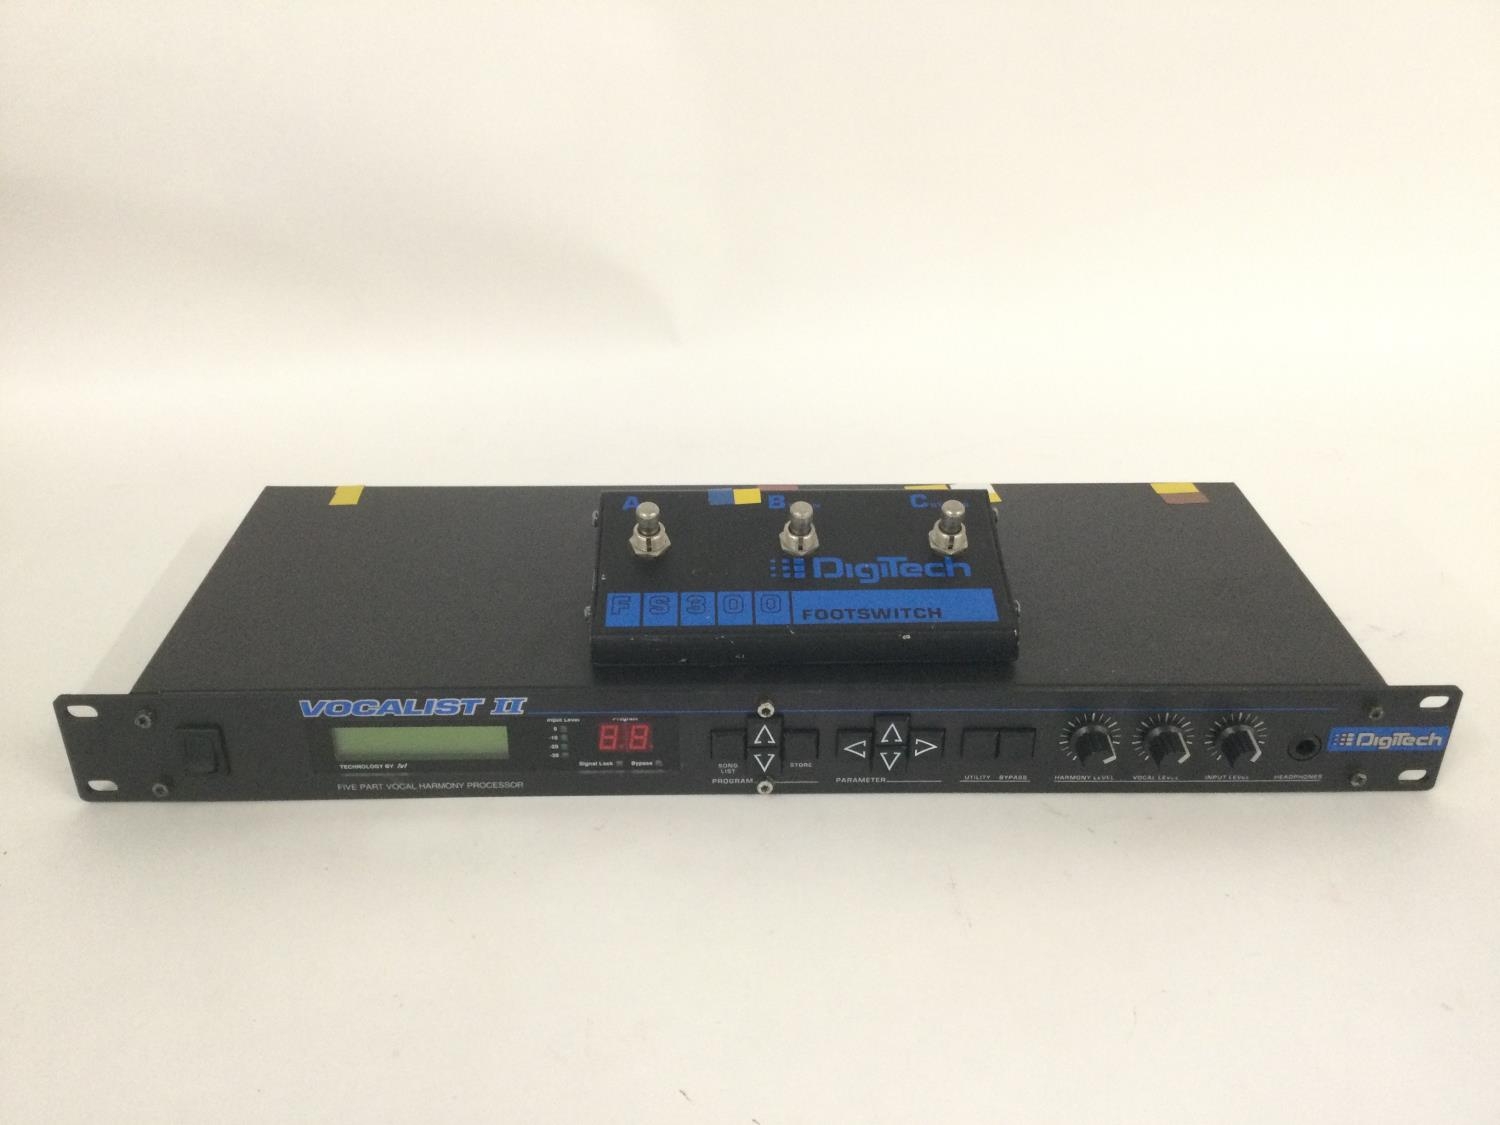 A Digitech Vocalist II vocal processor with footswitch and manual.